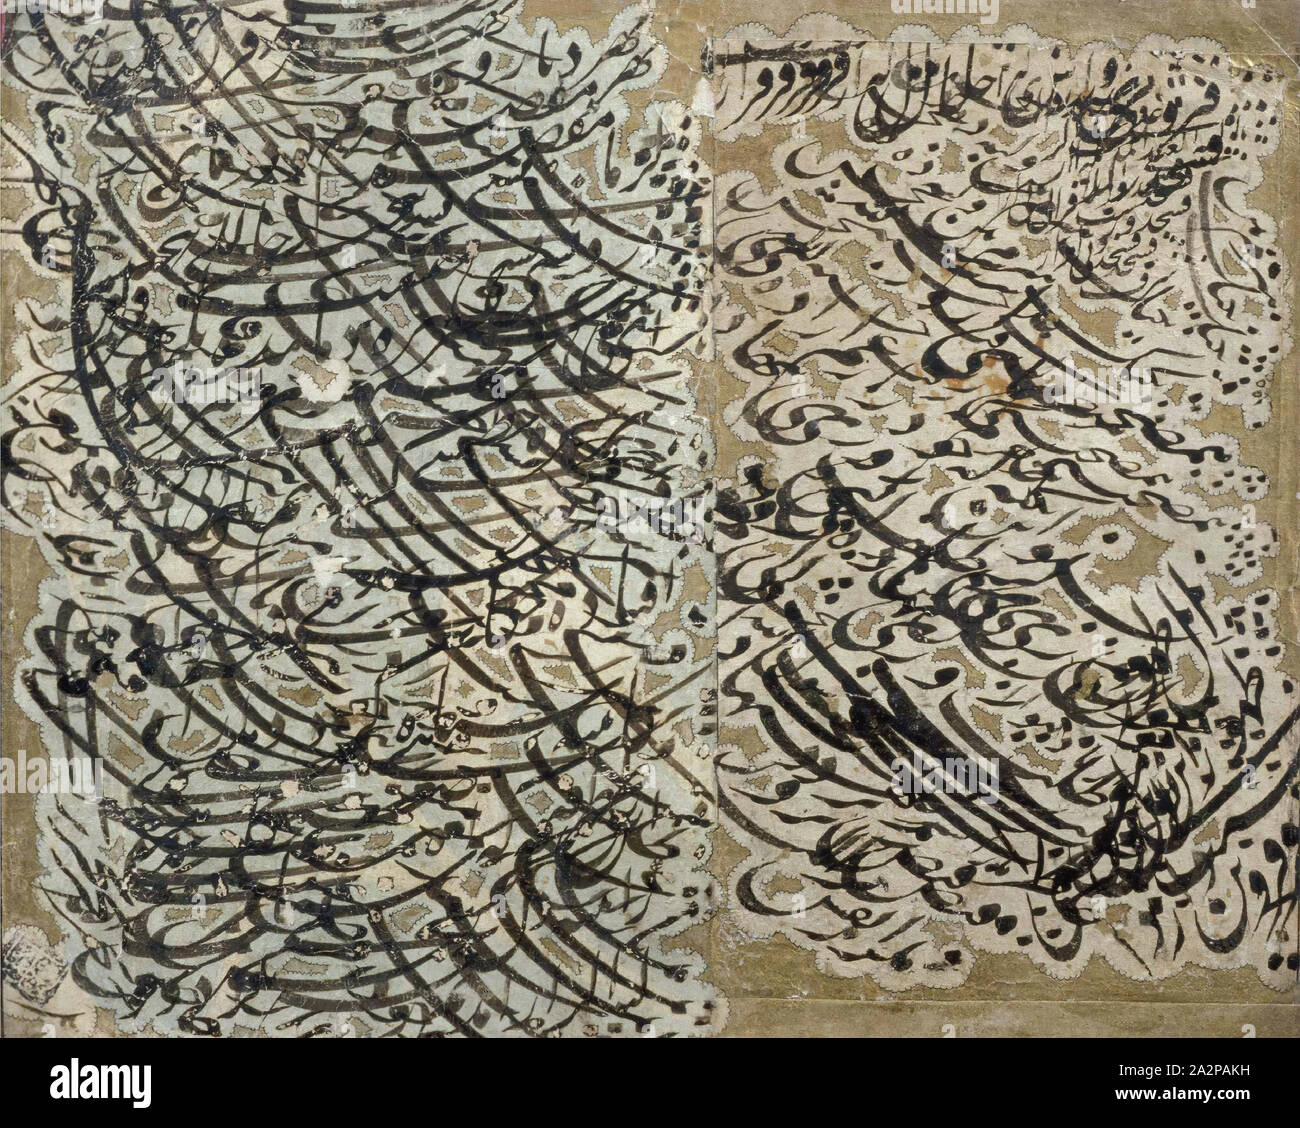 Islamic, Iranian, Calligraphic Exercise, 18th/19th Century, Ink and gold on paper Stock Photo